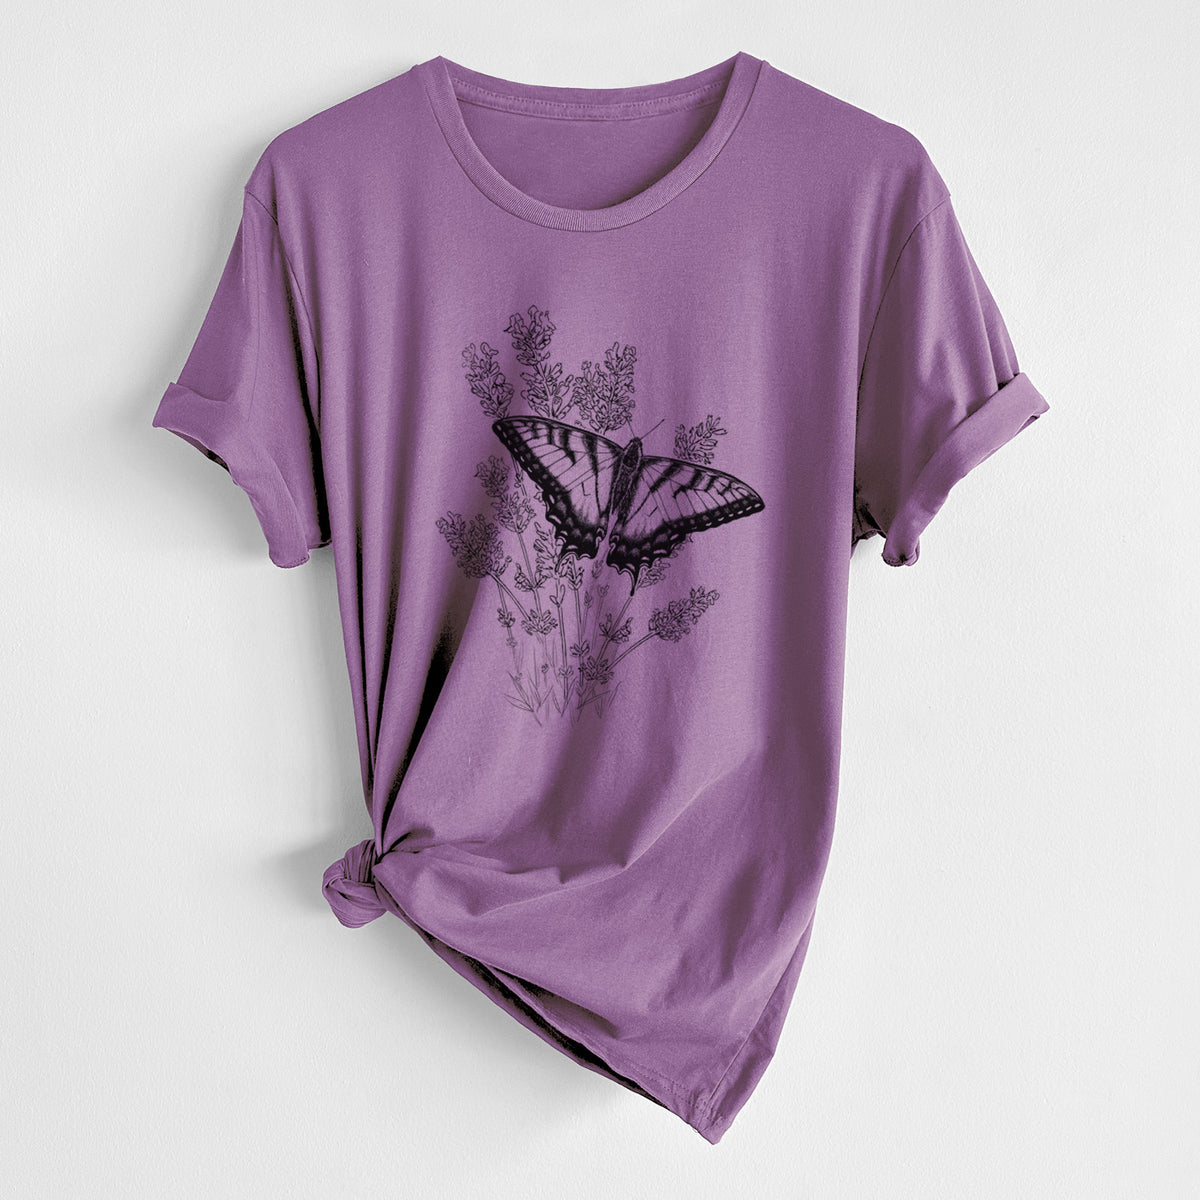 Eastern Tiger Swallowtail with Lavender - Unisex Crewneck - Made in USA - 100% Organic Cotton